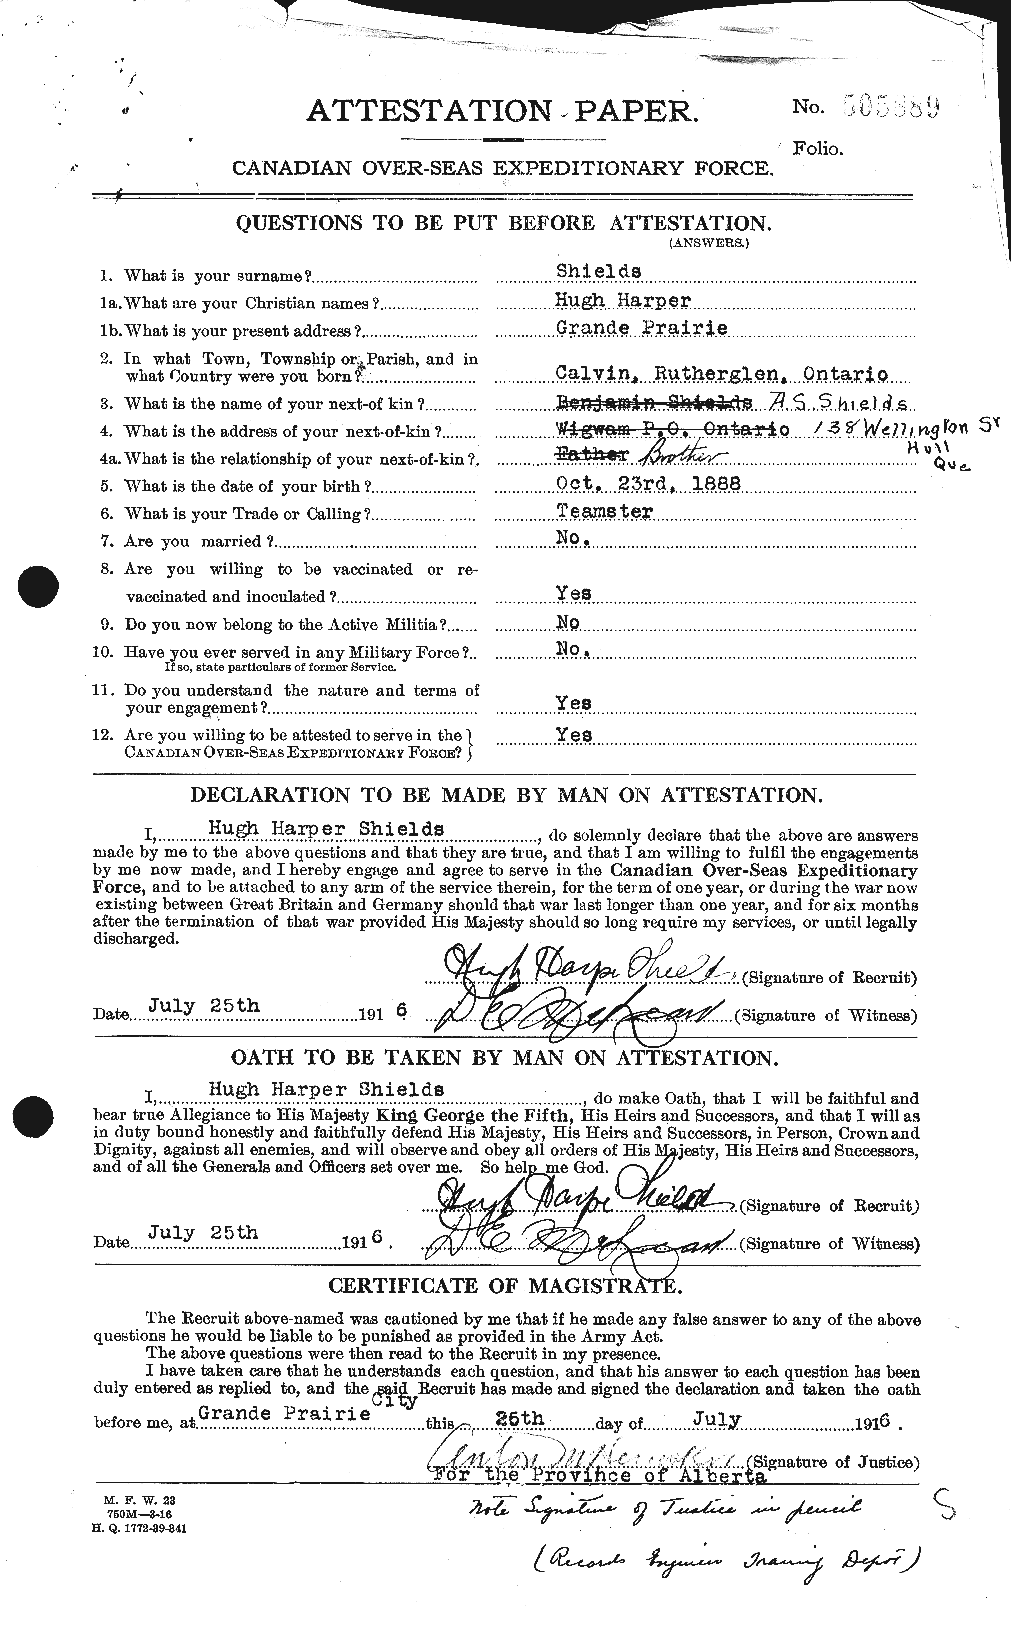 Personnel Records of the First World War - CEF 090399a